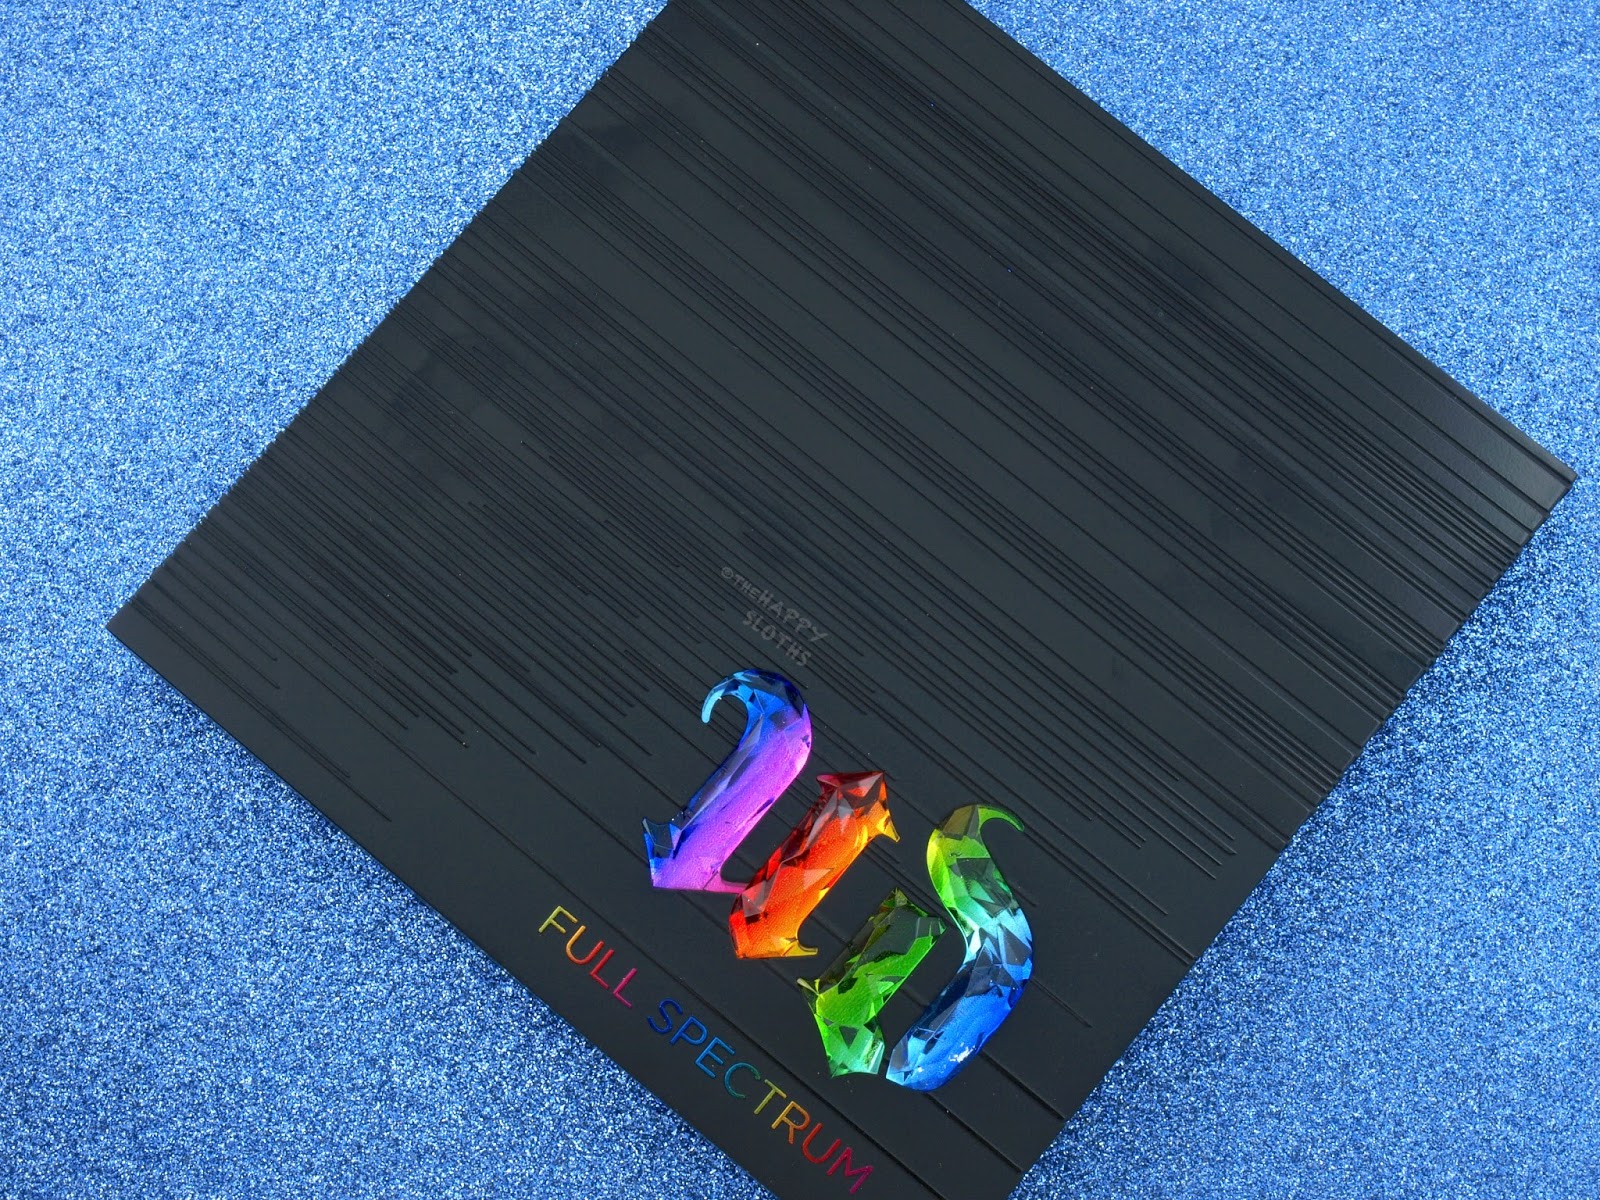 Urban Decay Full Spectrum Eyeshadow Palette Review and Swatches